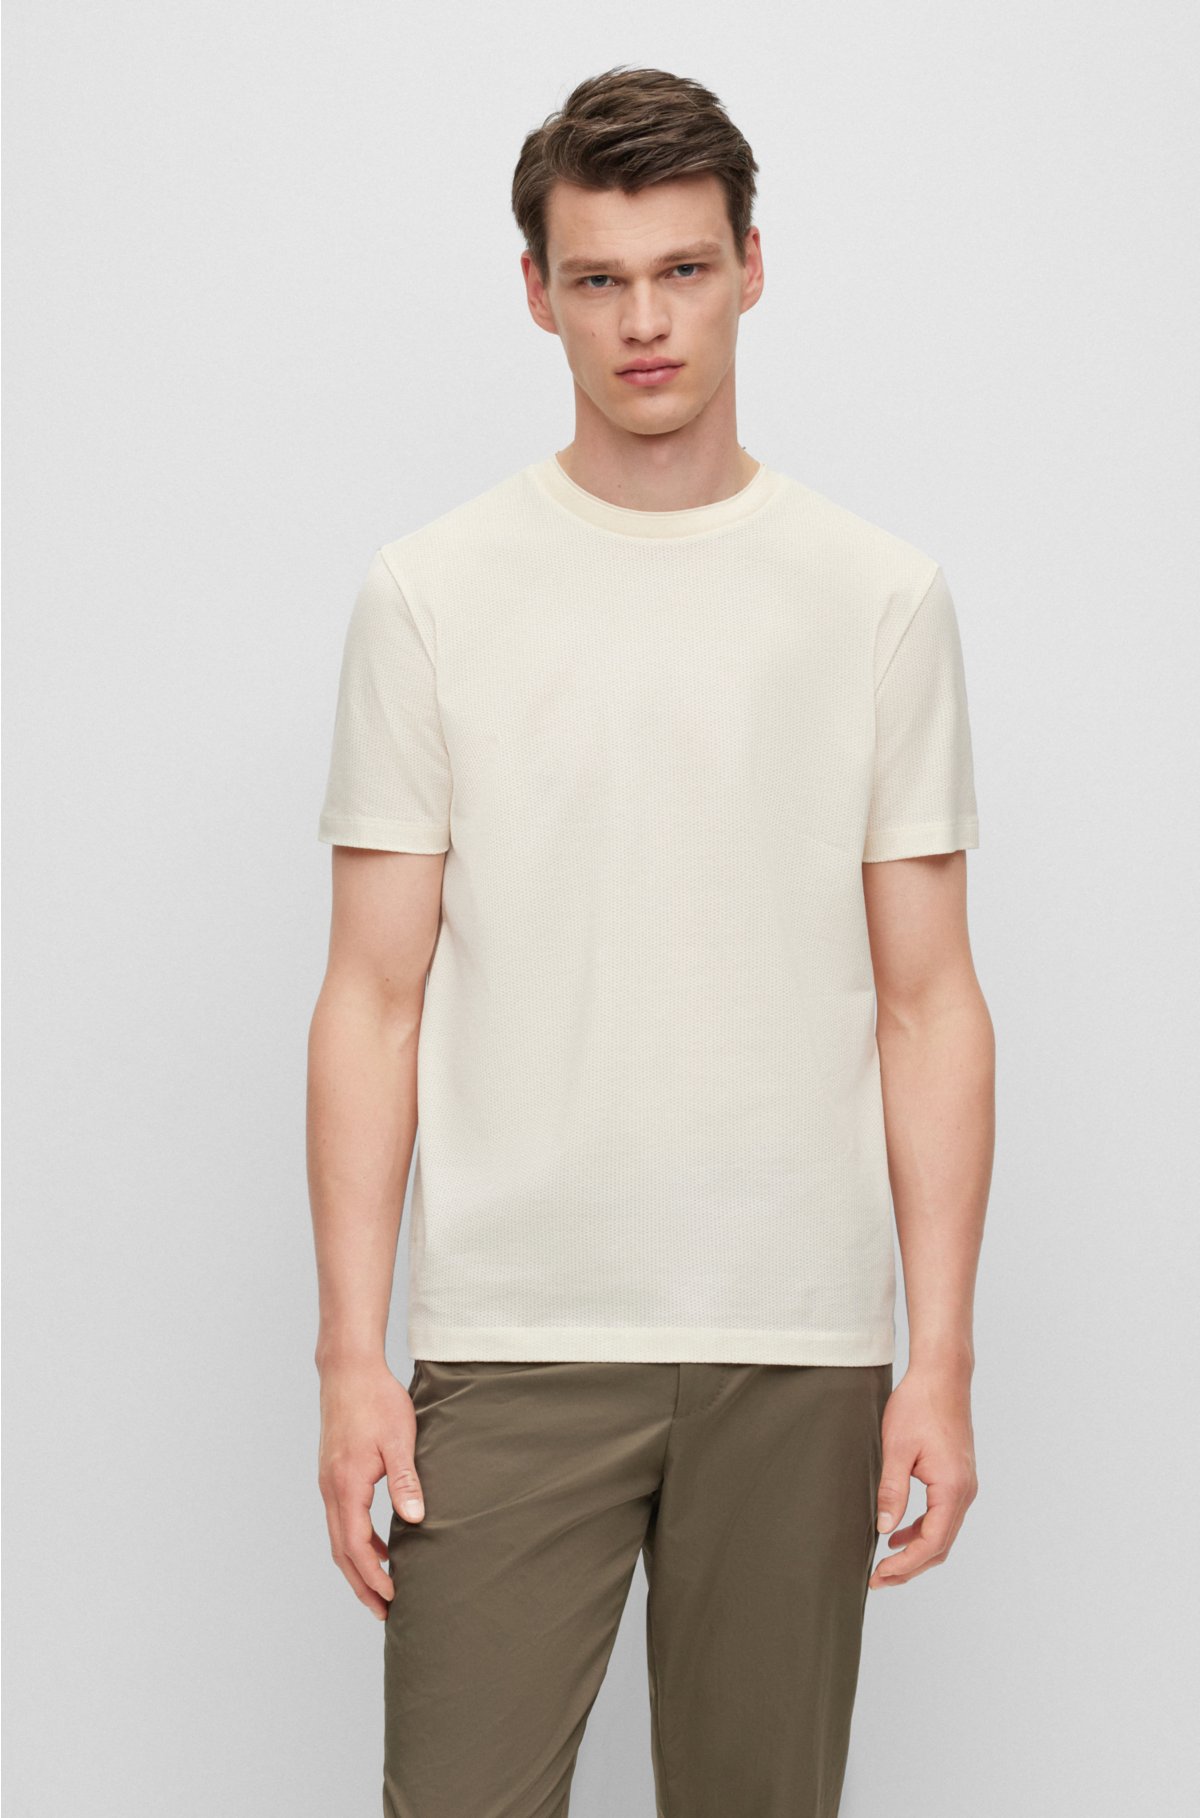 Mesh-structure T-shirt in a mercerized-cotton blend, White